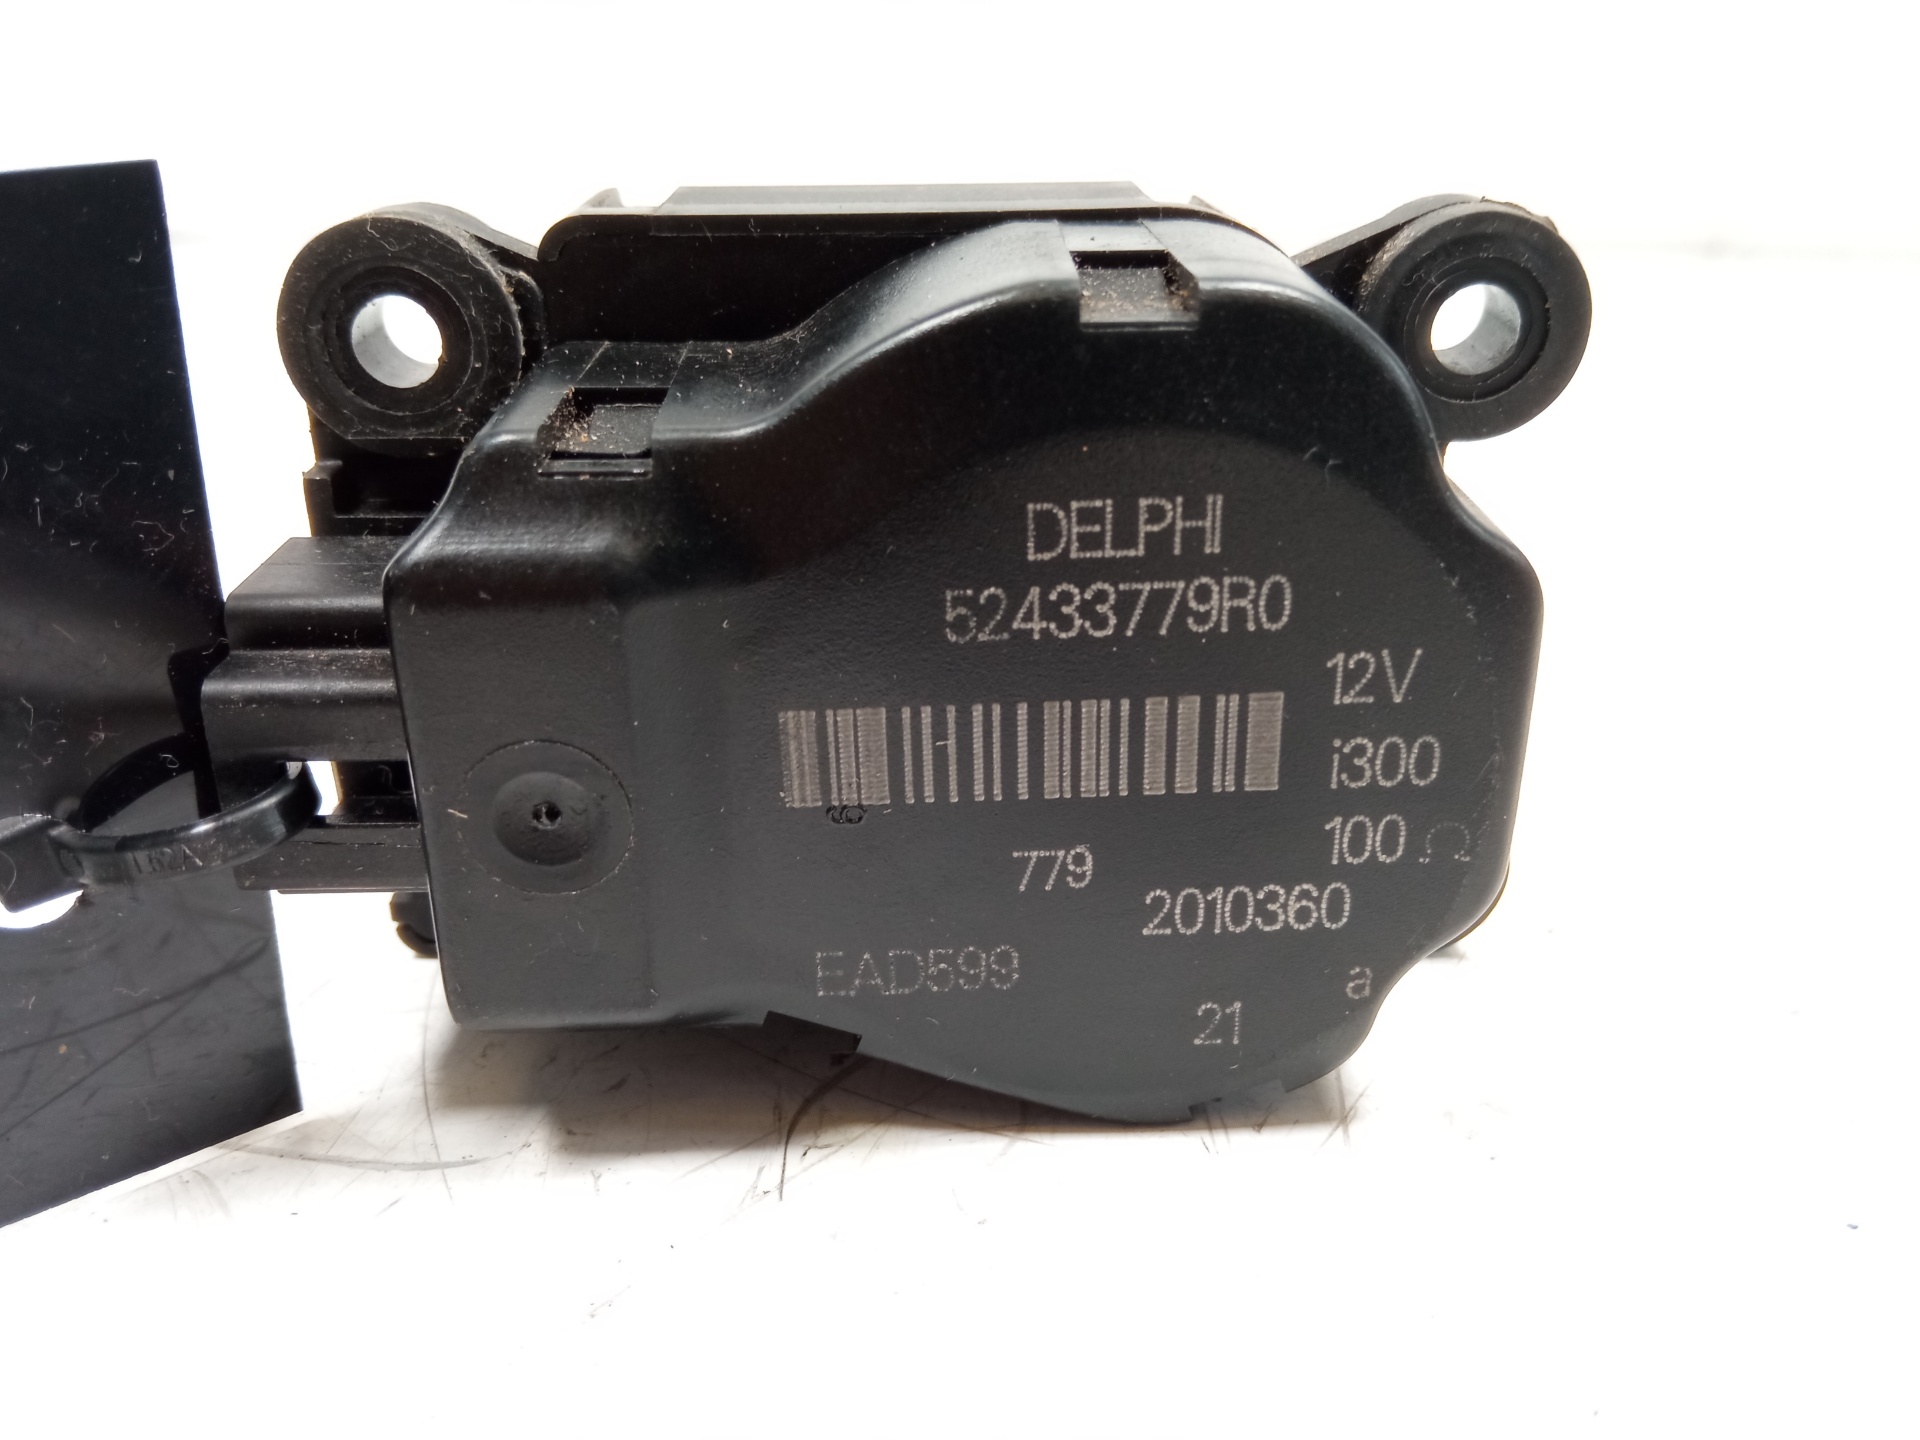 OPEL Insignia A (2008-2016) Air Conditioner Air Flow Valve Motor 52433779R0, 6PINES 24853822